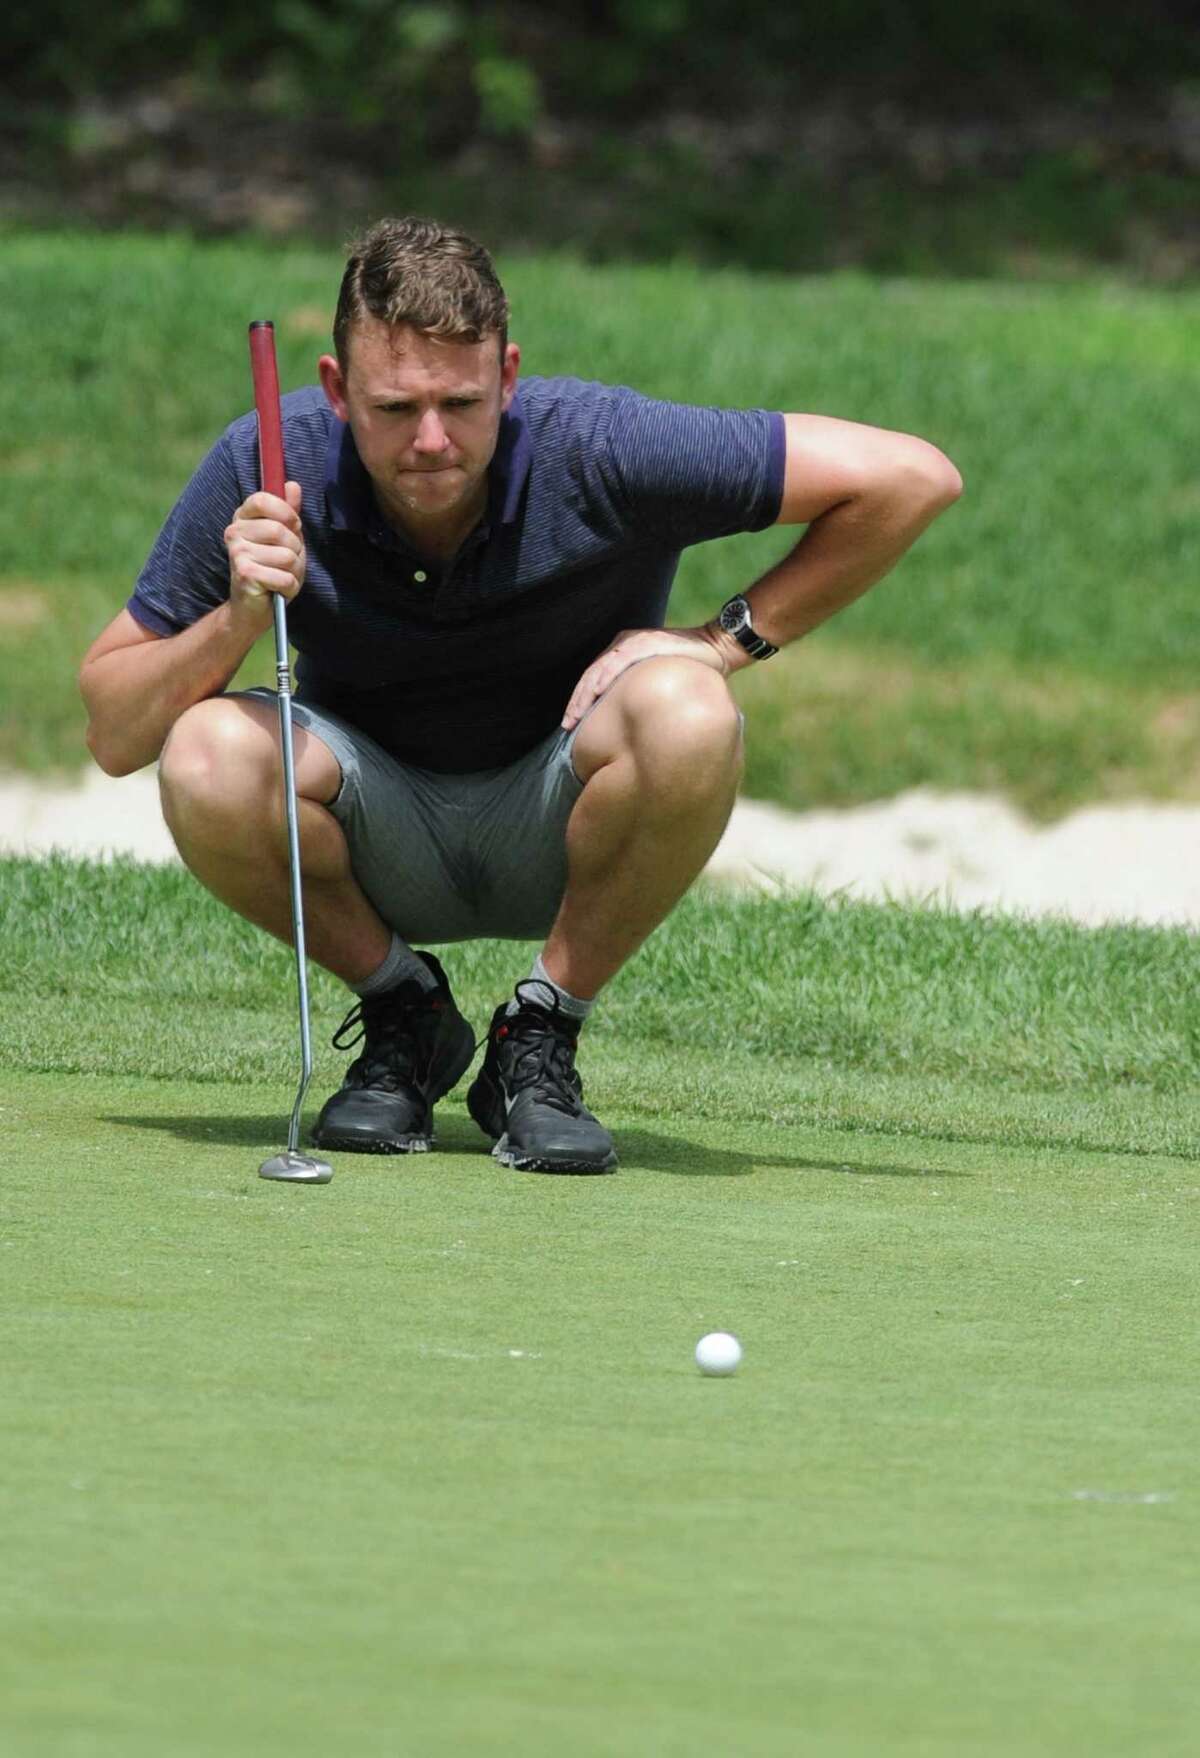 Michael Fisher lines up a putt during day two of the Danbury Amateur Golf Championship at Richter Park Golf Club in Danbury, Conn. on Saturday, July 21, 2013.